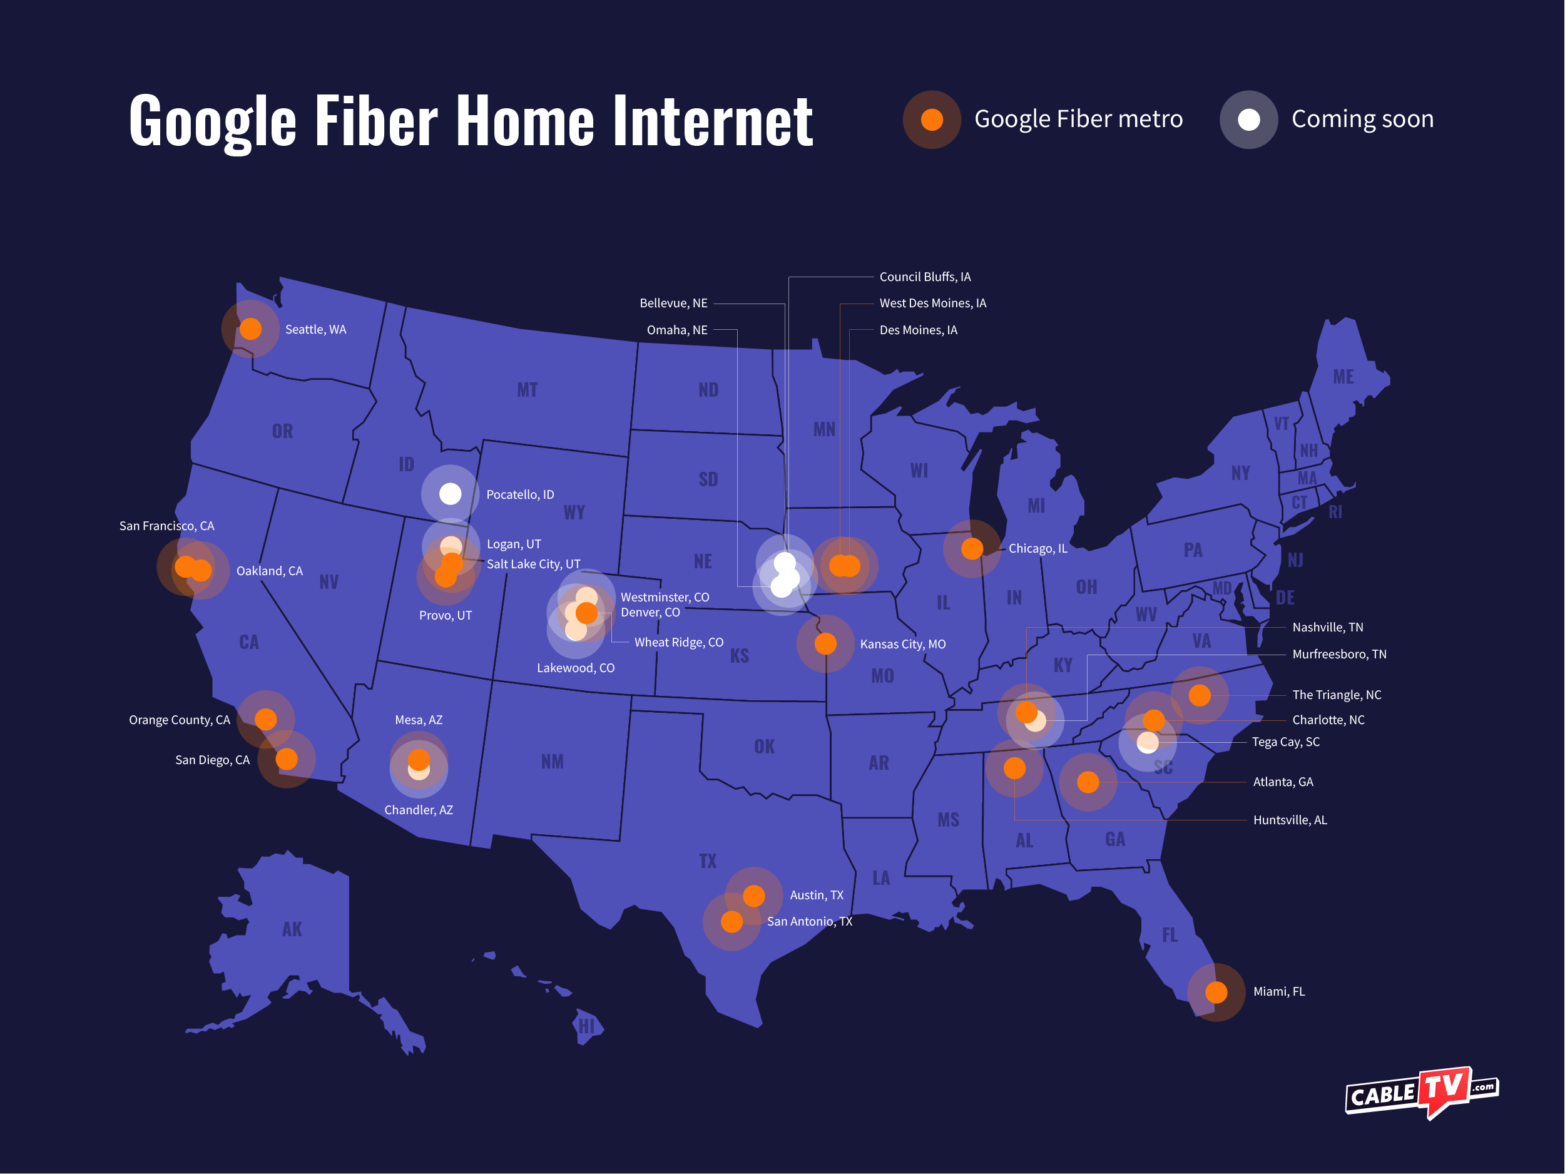 A map of the U.S. that shows cities and states with Google Fiber home internet service.